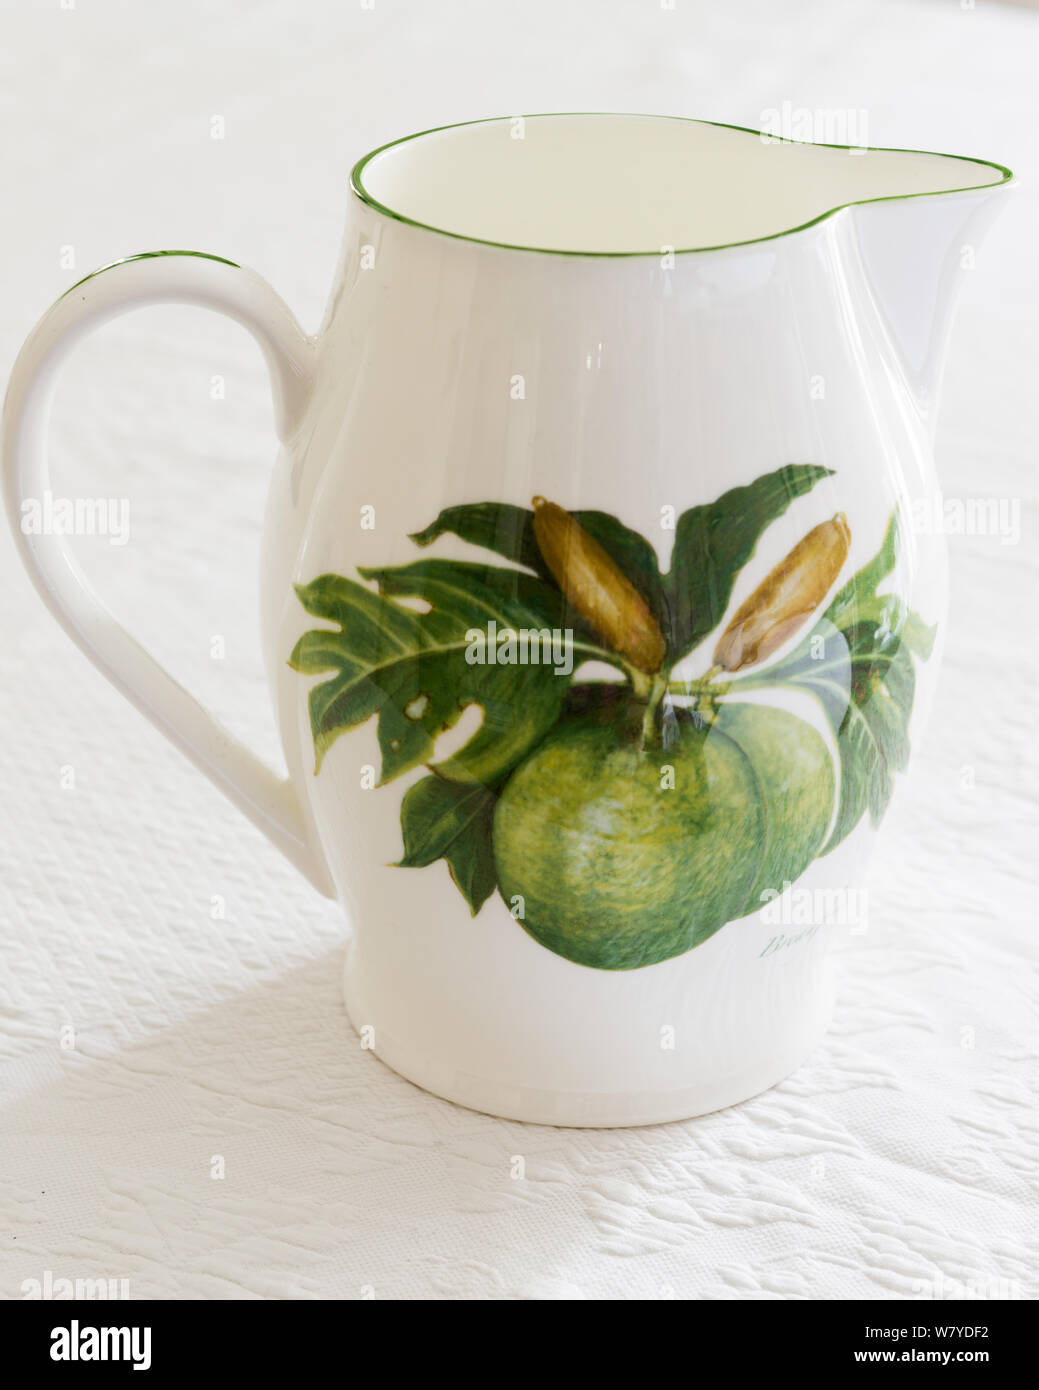 Pitcher from Jenny Mein's breadfruit collection Stock Photo